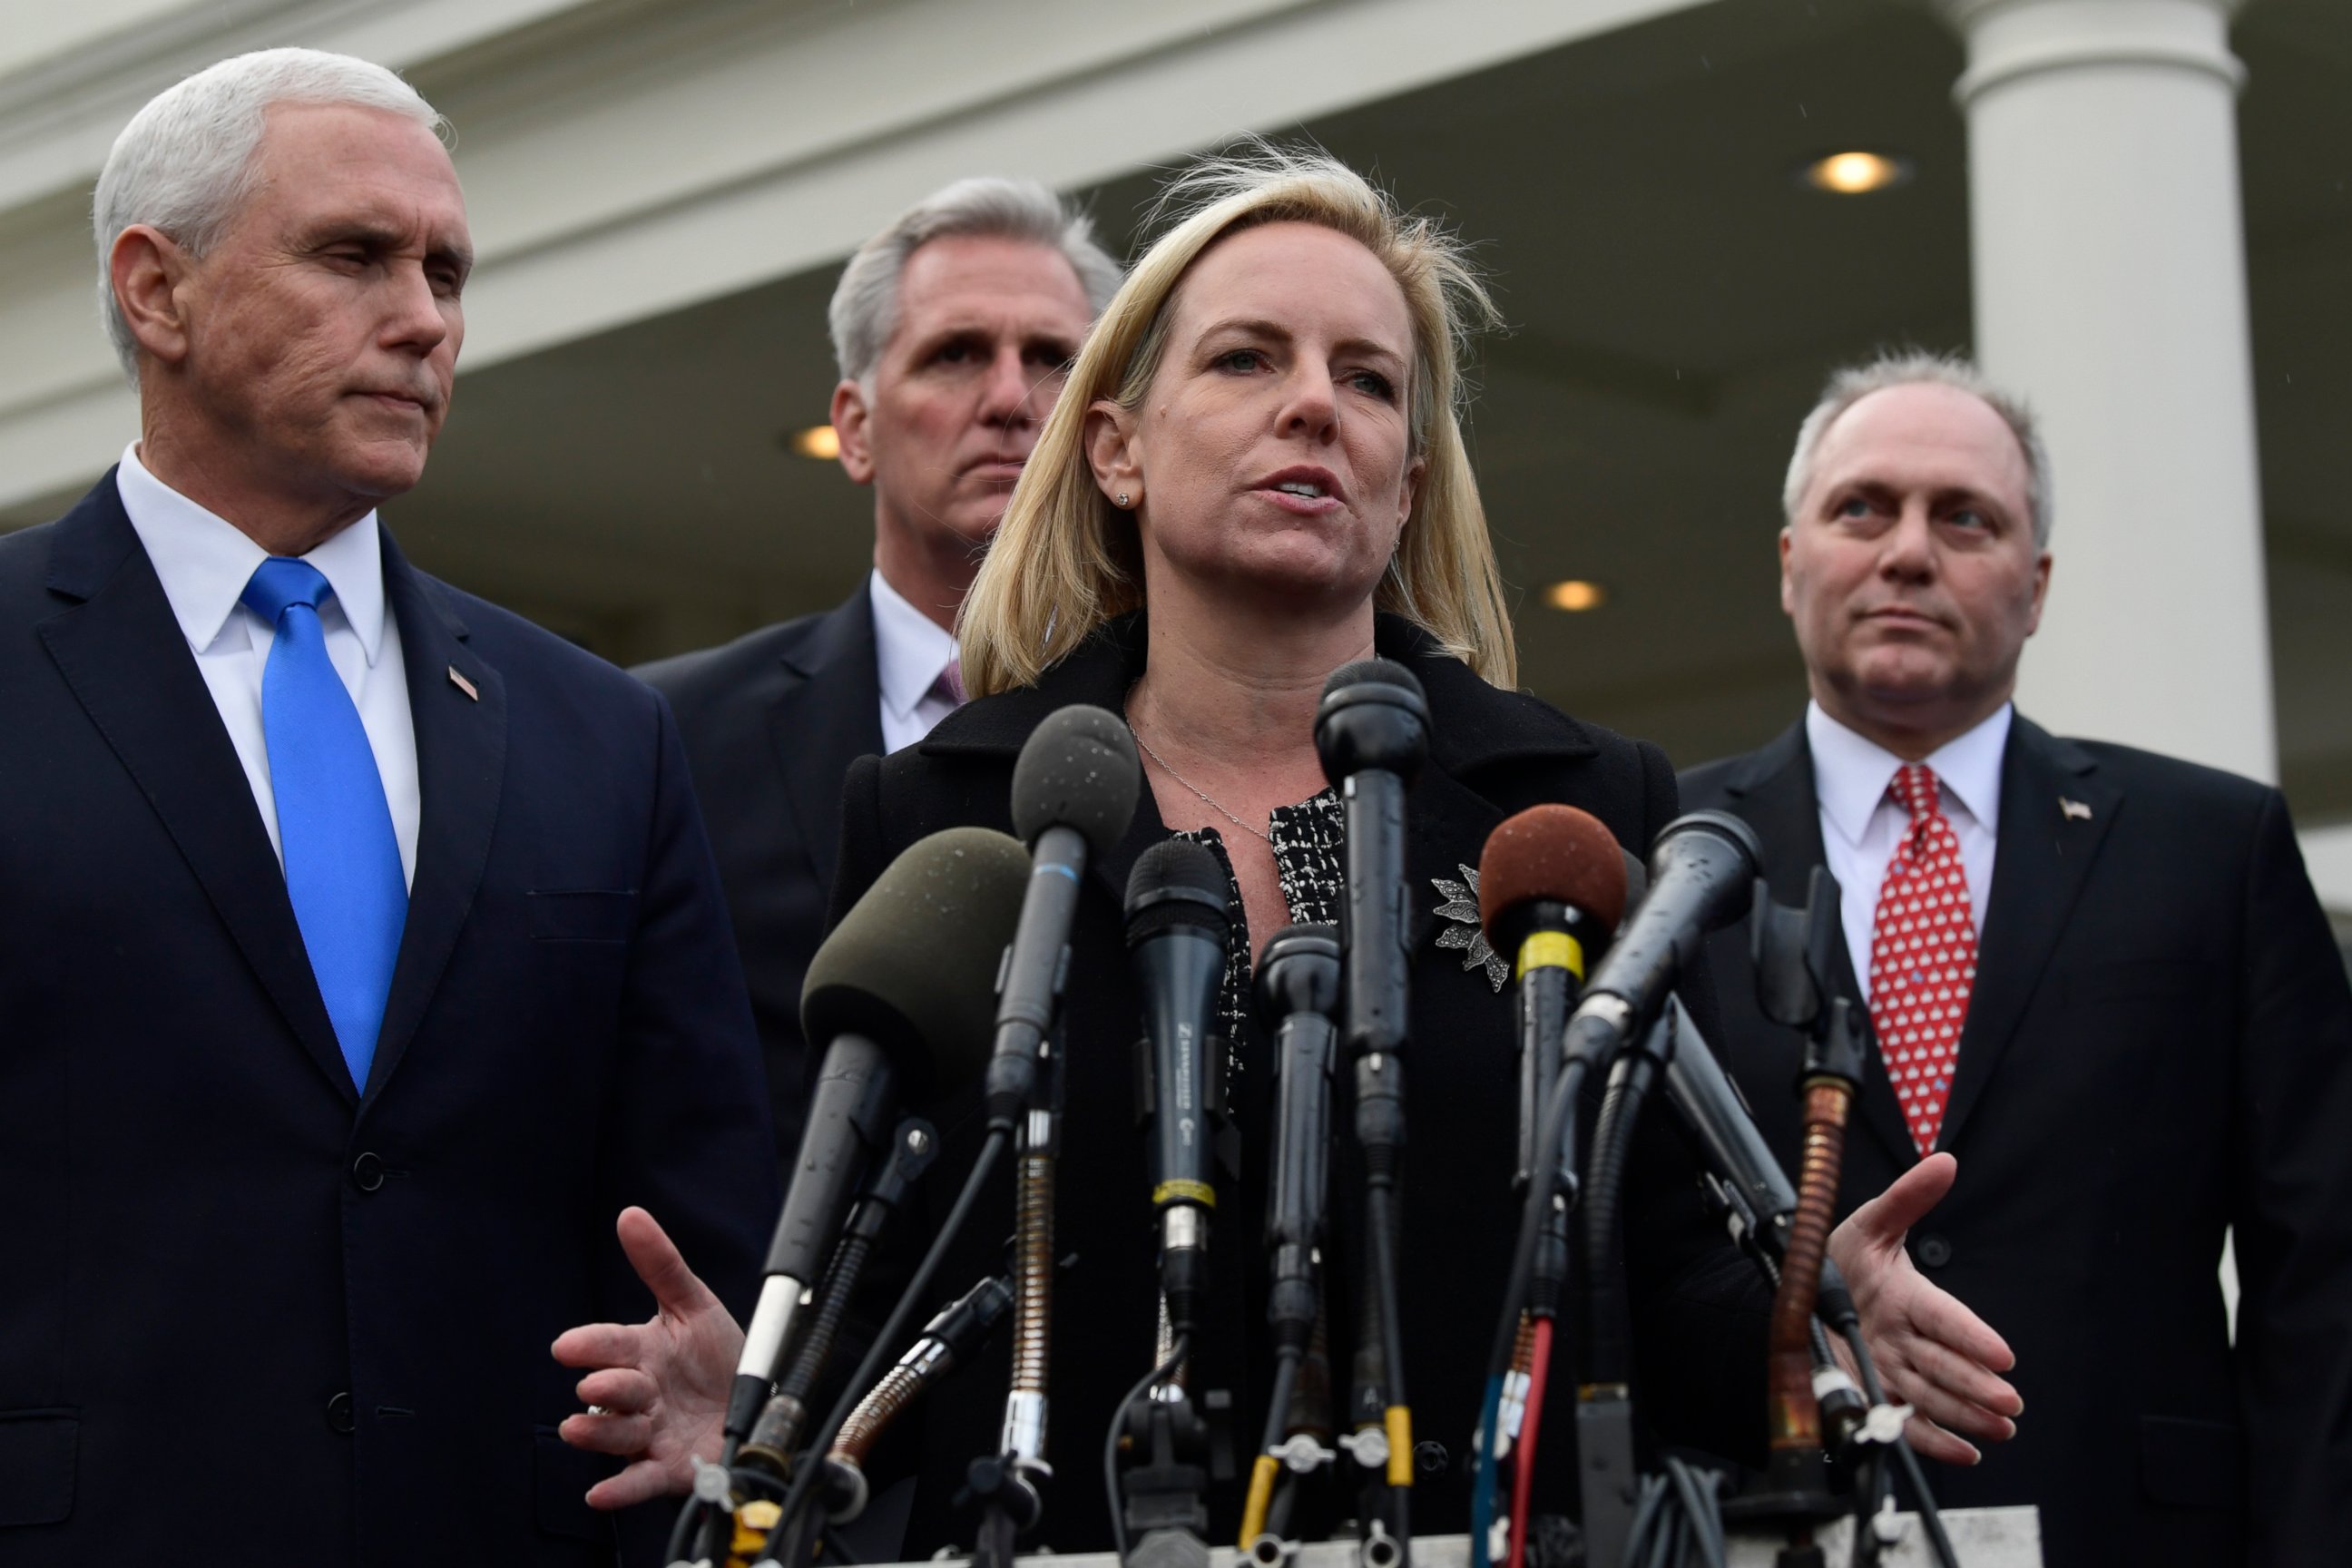 PHOTO: In this Jan. 9, 2019, photo, Homeland Security Secretary Kirstjen Nielsen, second from right, standing with Vice President Mike Pence, speaks to reporters following a meeting at the White House in Washington.